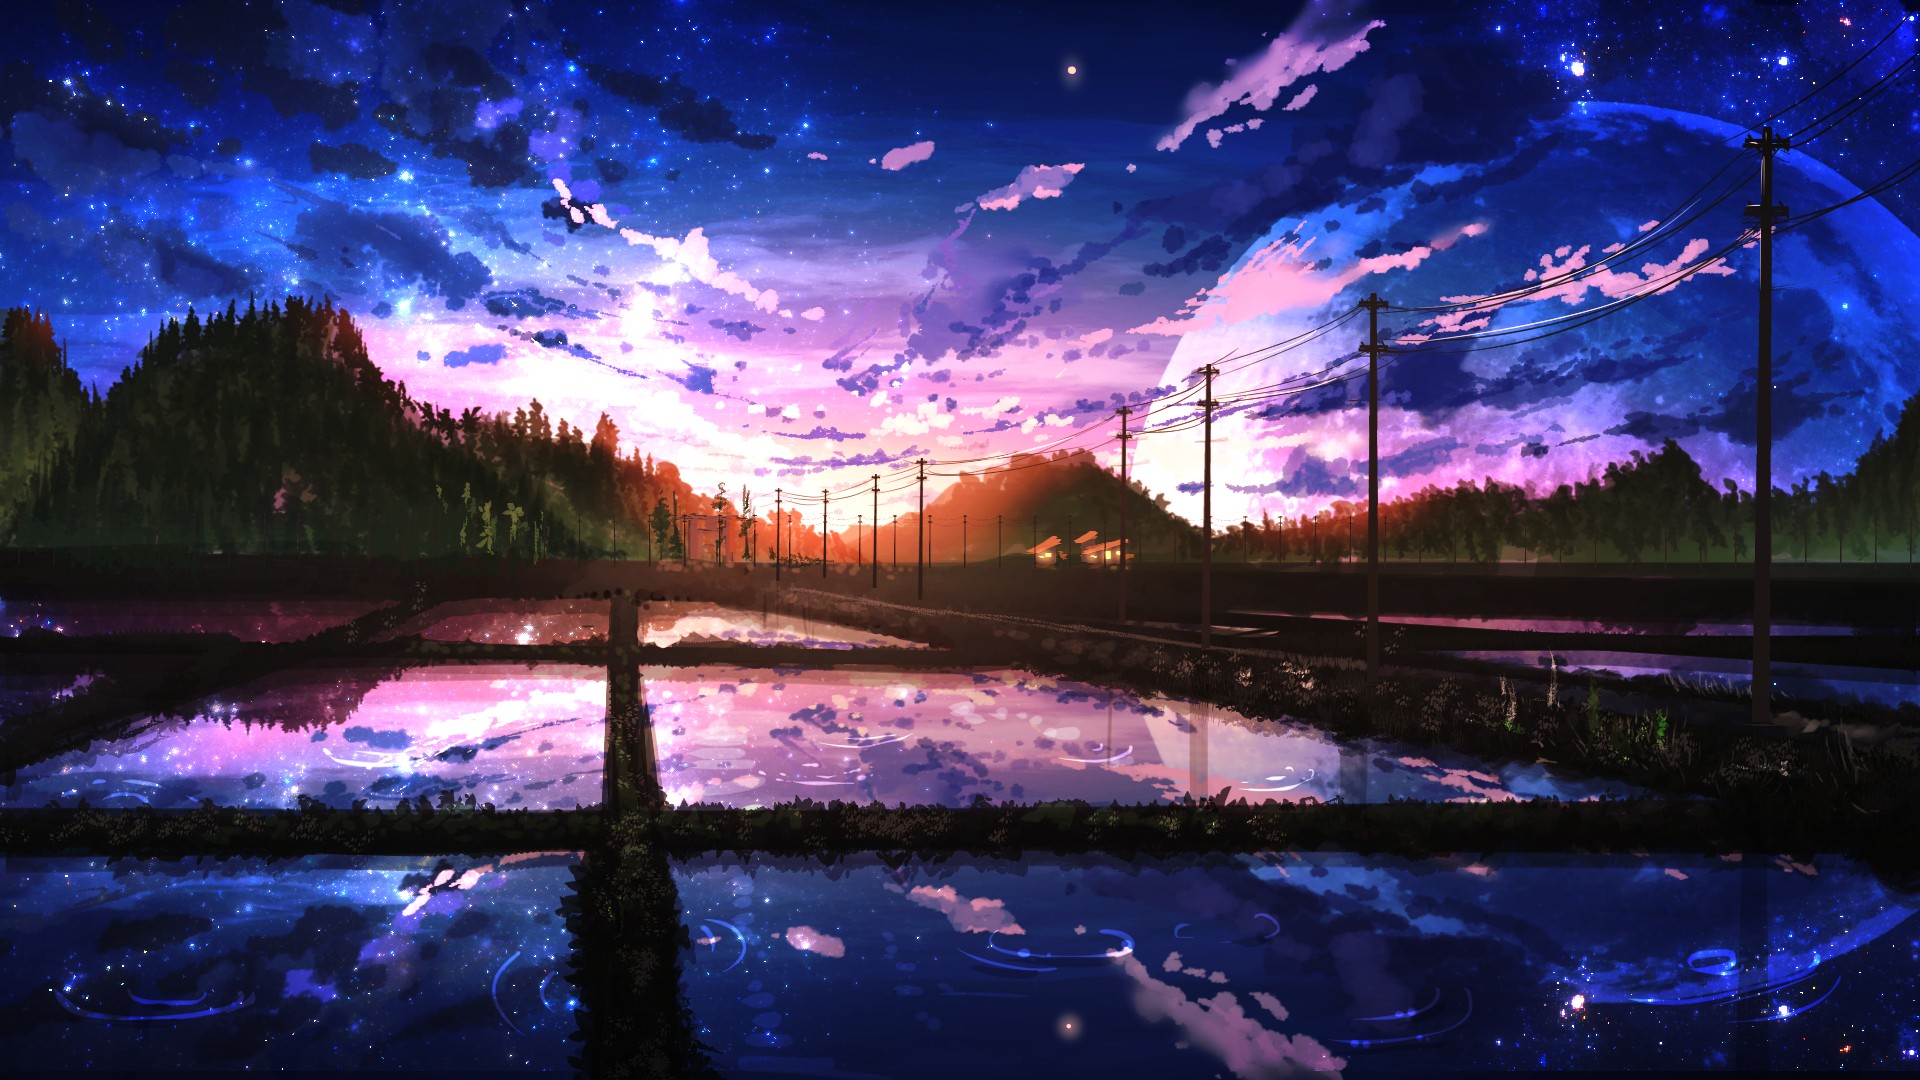 General 1920x1080 digital art landscape sunlight trees building clouds forest Moon night Nobody reflection sunset water anime